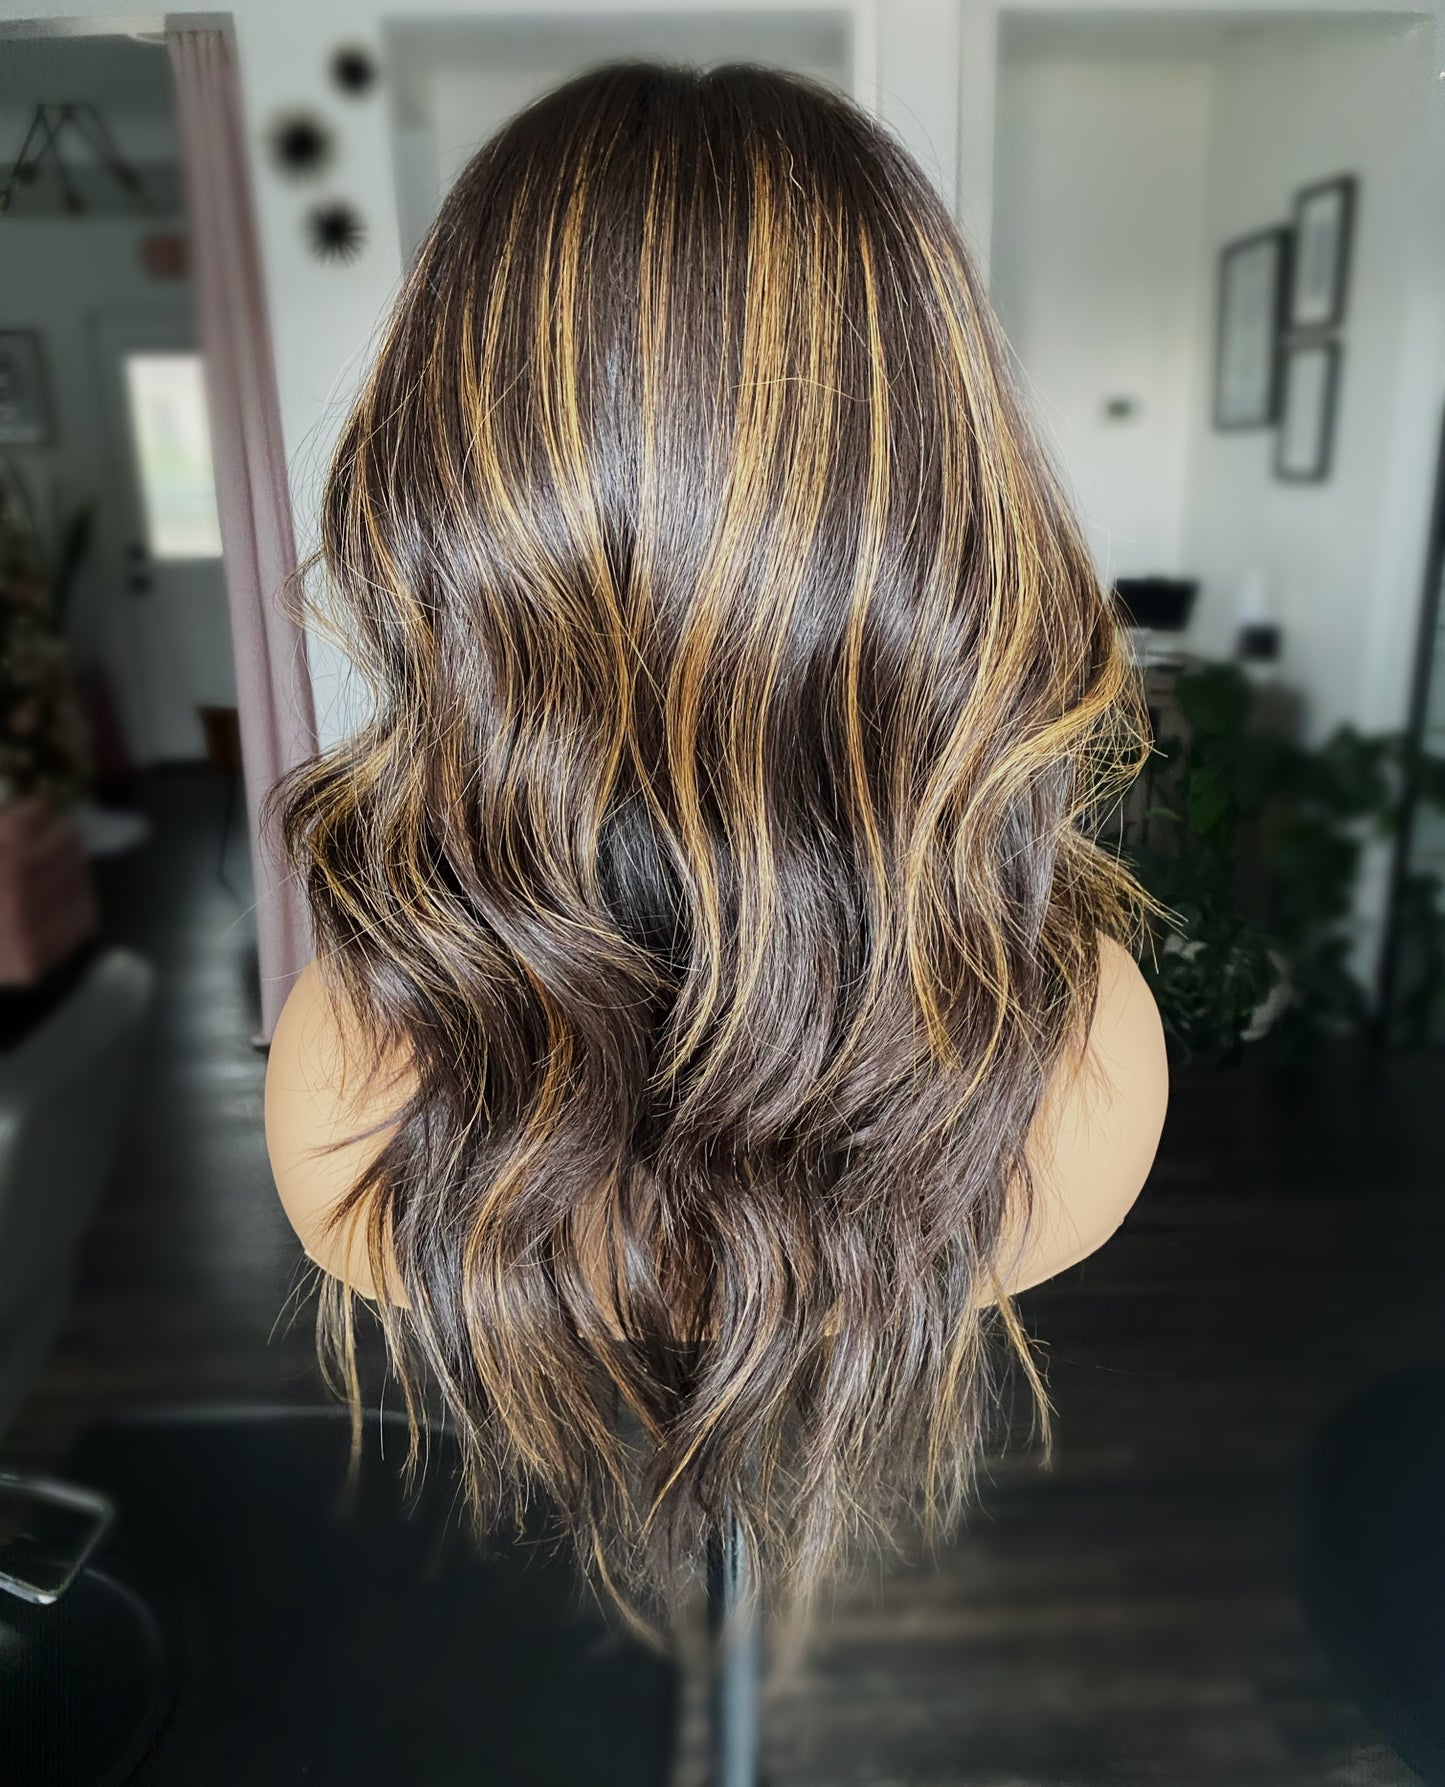 The "April" Unit 14" Long Layers w/highlights